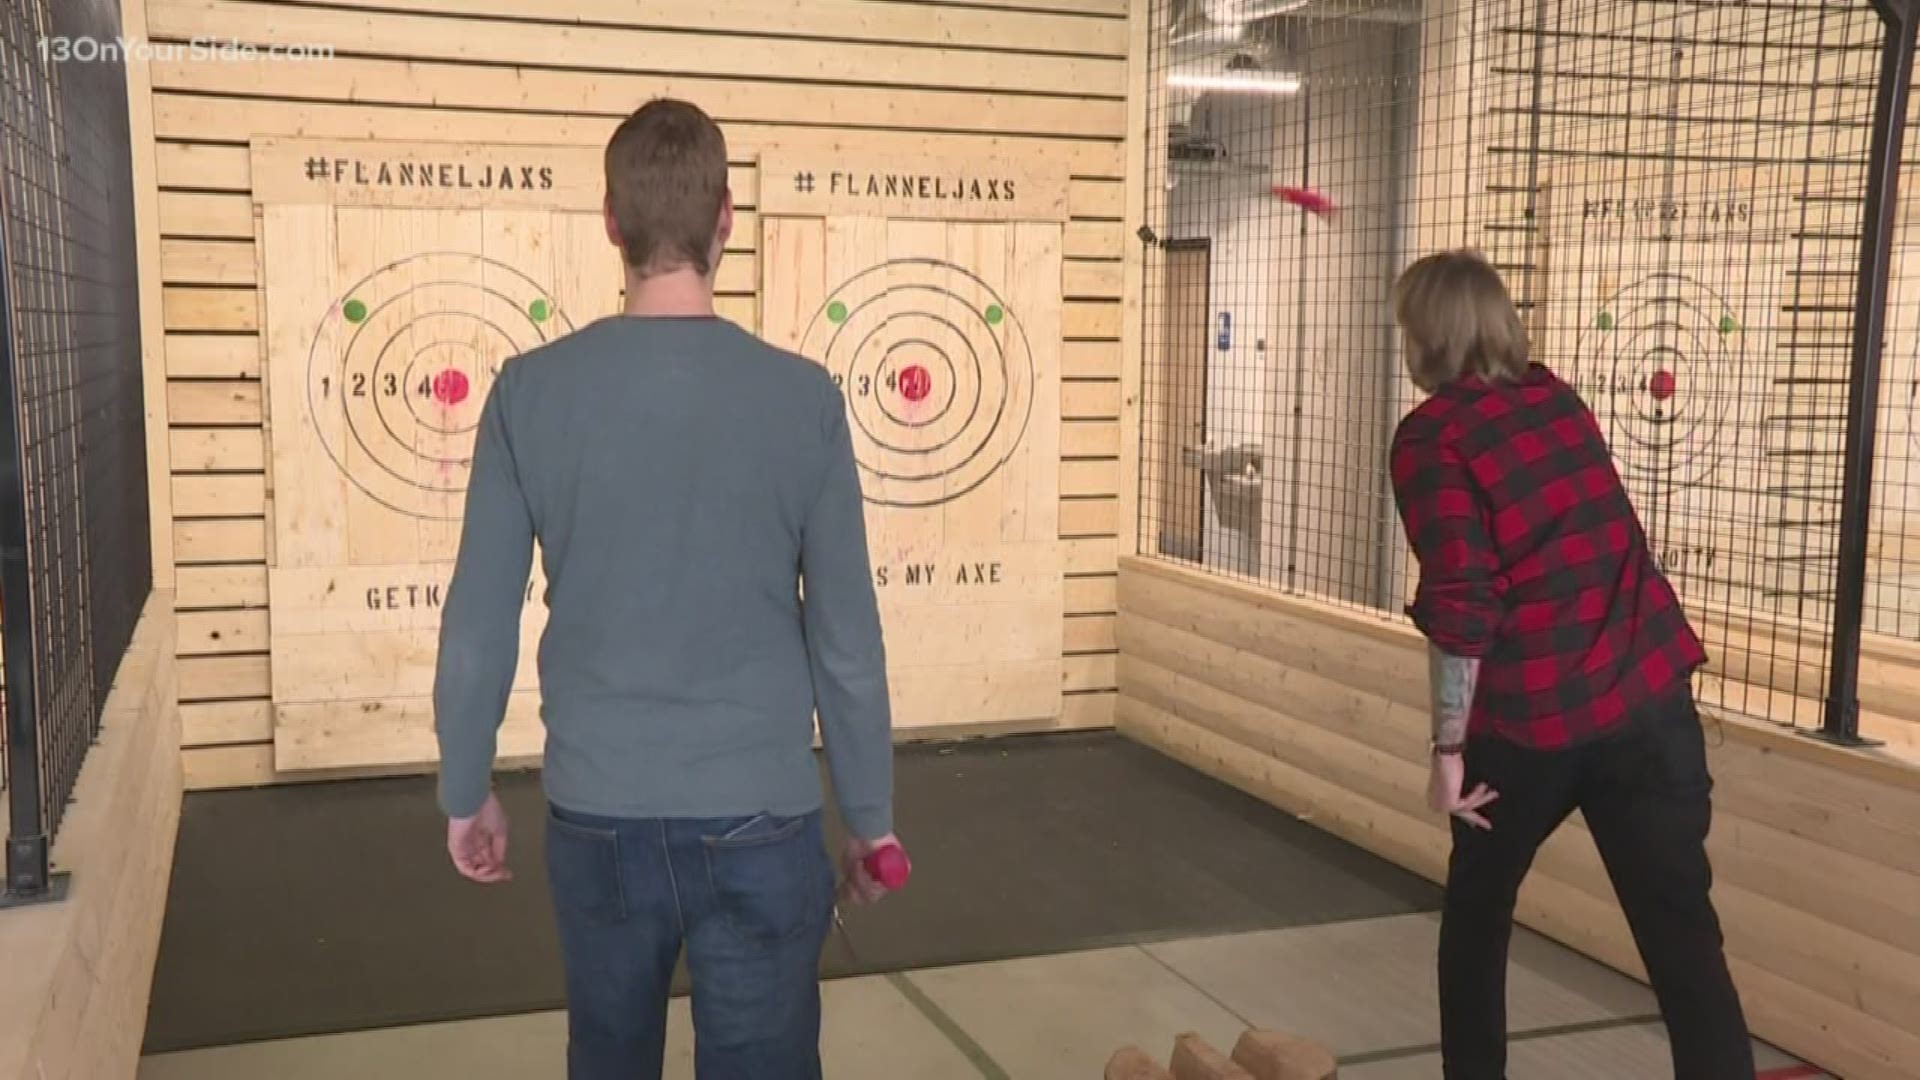 A new business aimed at bringing the lumberjack experience to customers is now open in Grand Rapids.